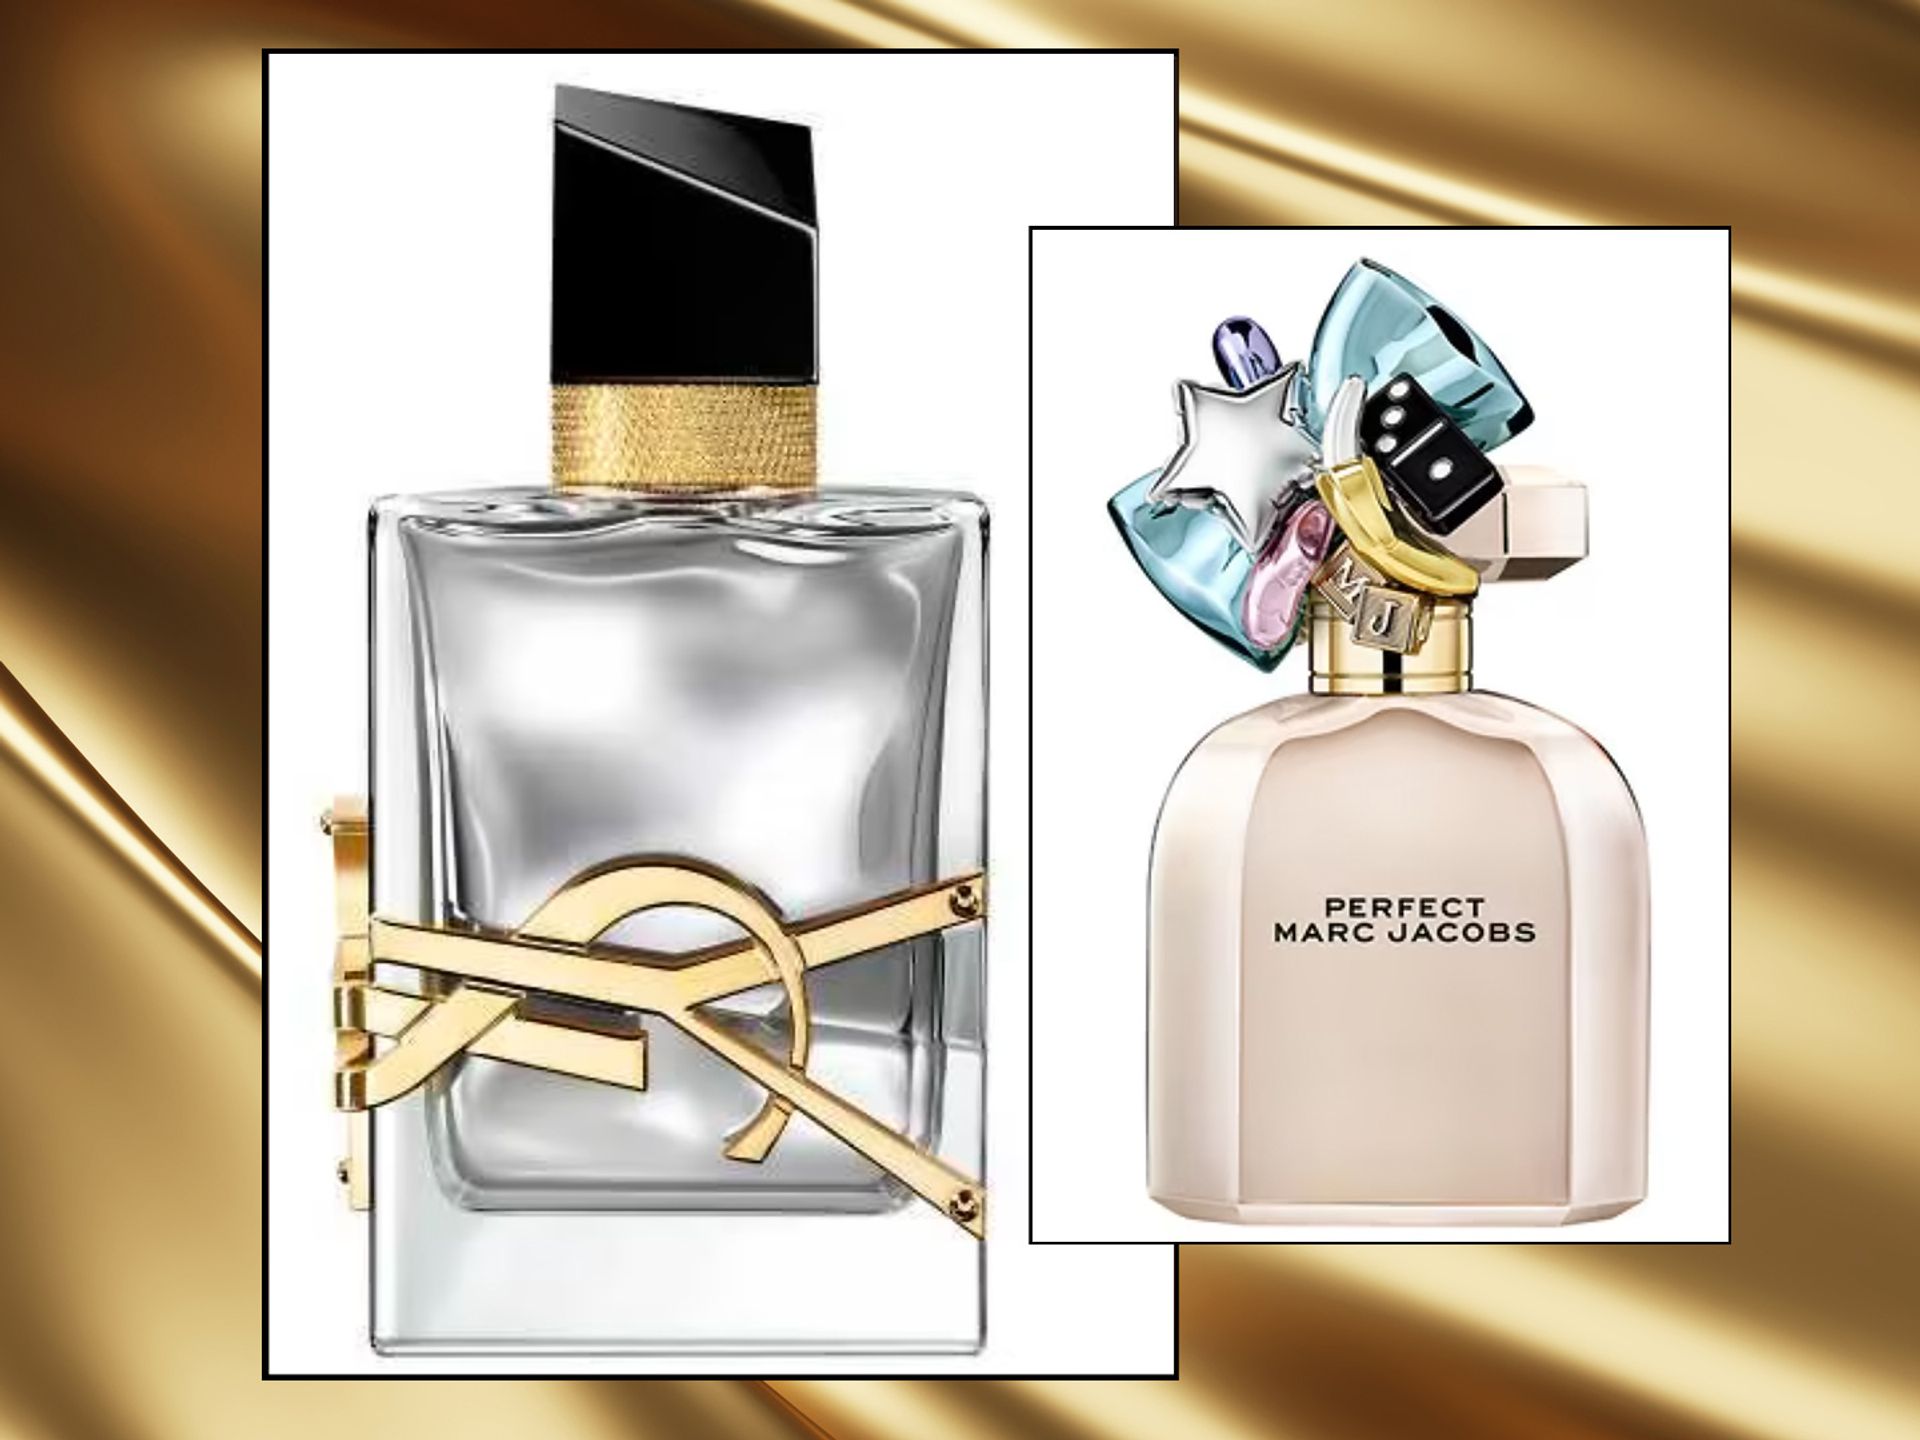 TikTok Swears These Perfumes Will Make People Fall in Love With You